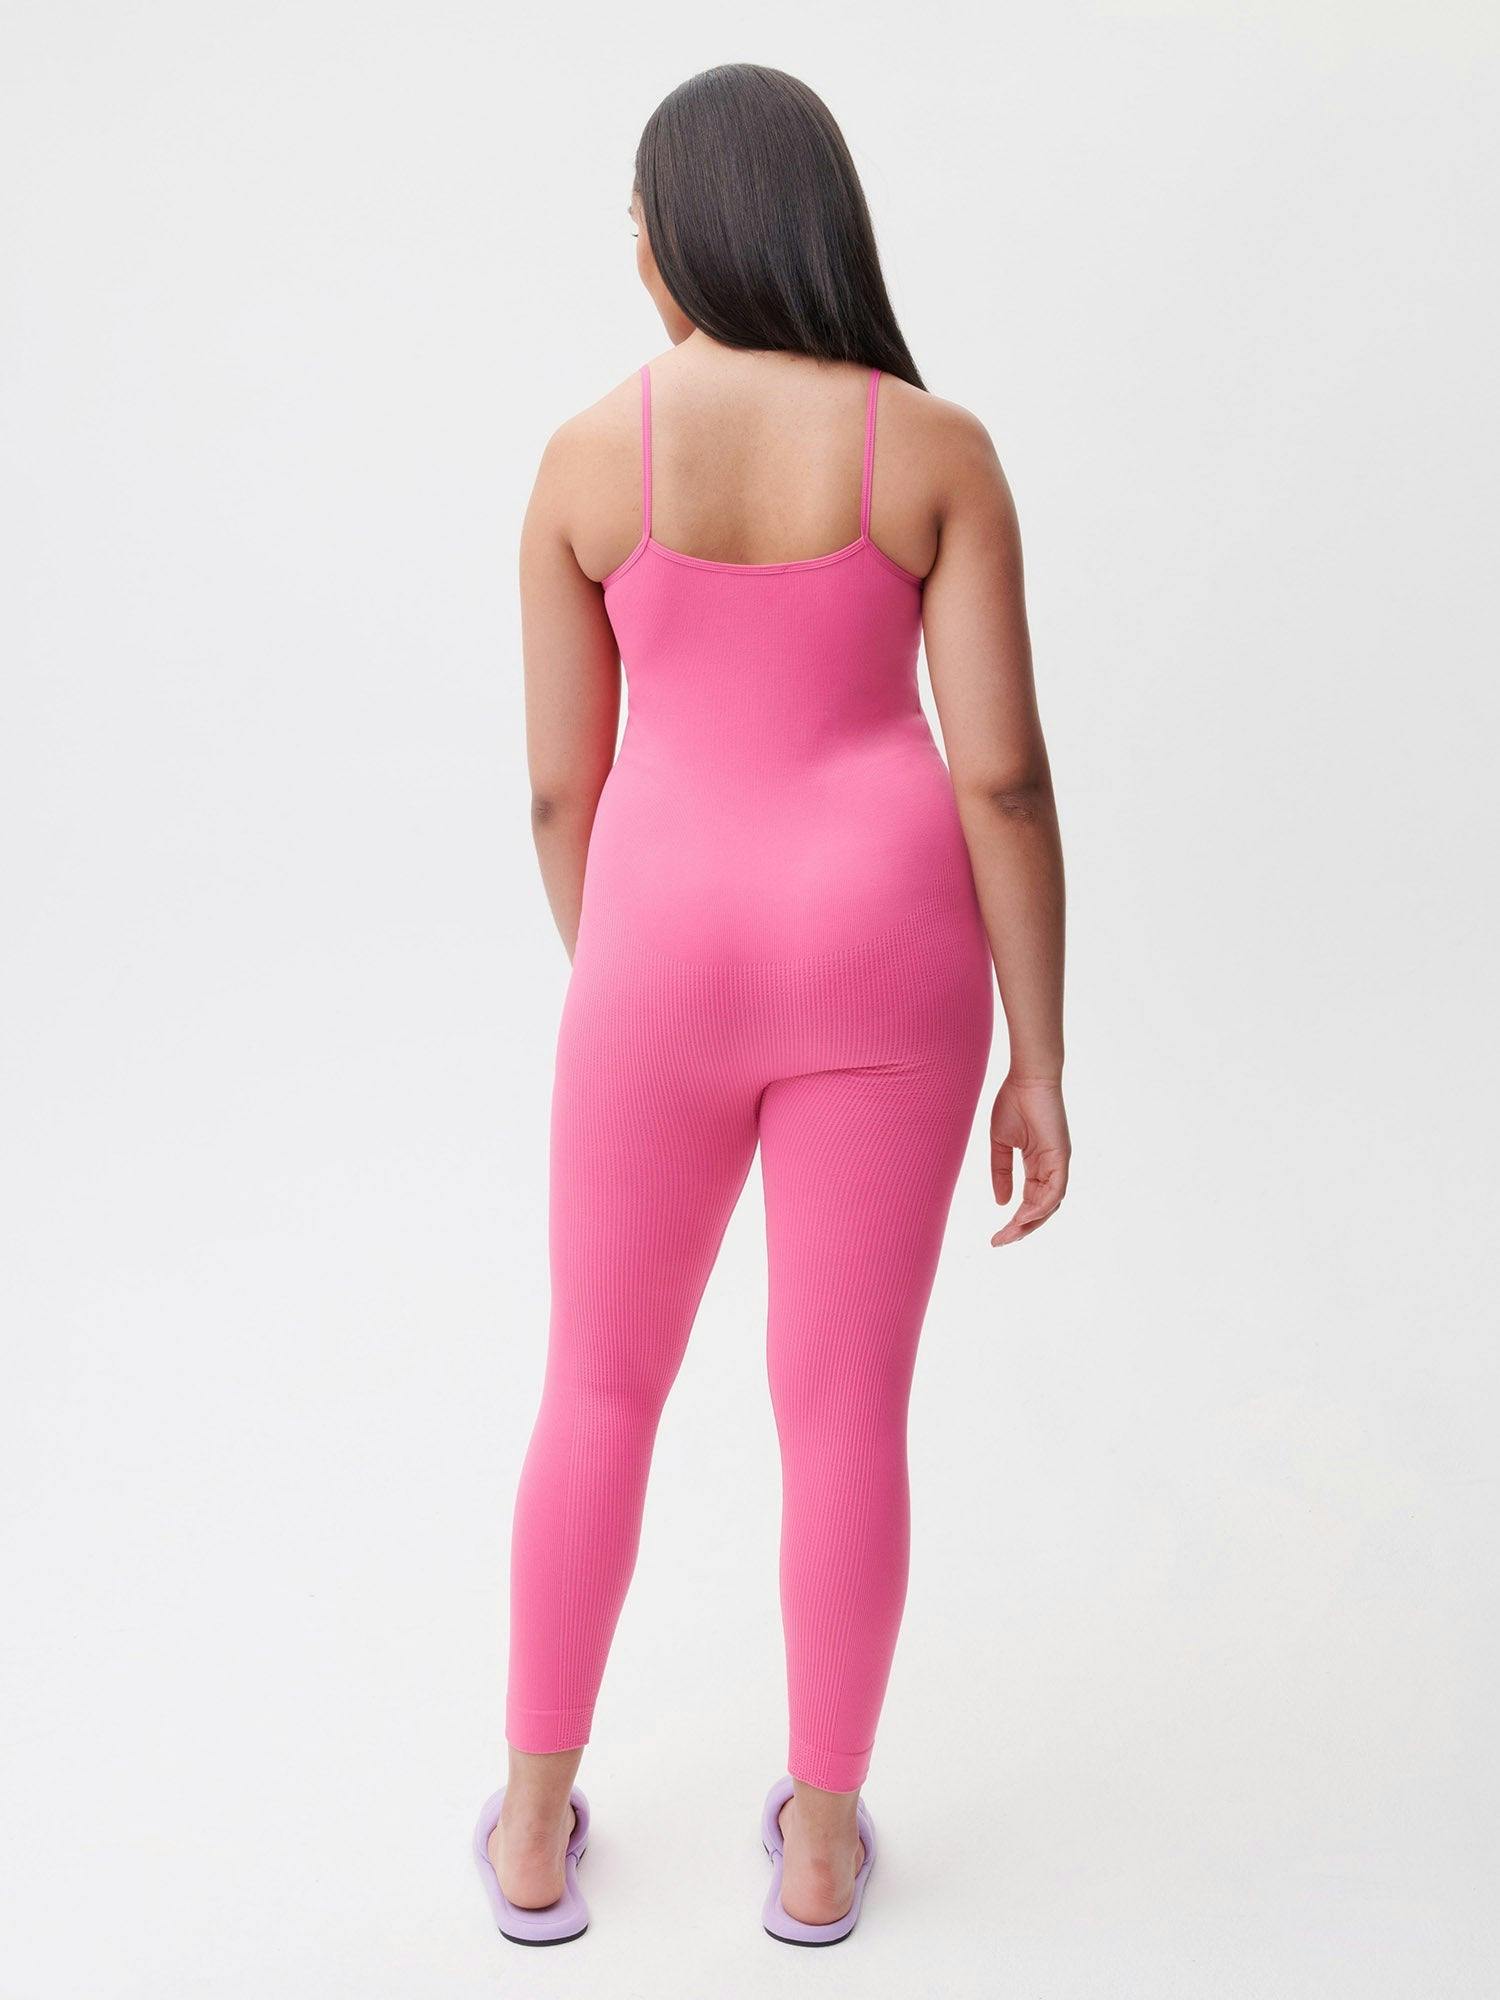 https://cdn.shopify.com/s/files/1/0035/1309/0115/products/Activewear-Womens-Jumpsuit-Flamingo-Pink-2.jpg?v=1662475879